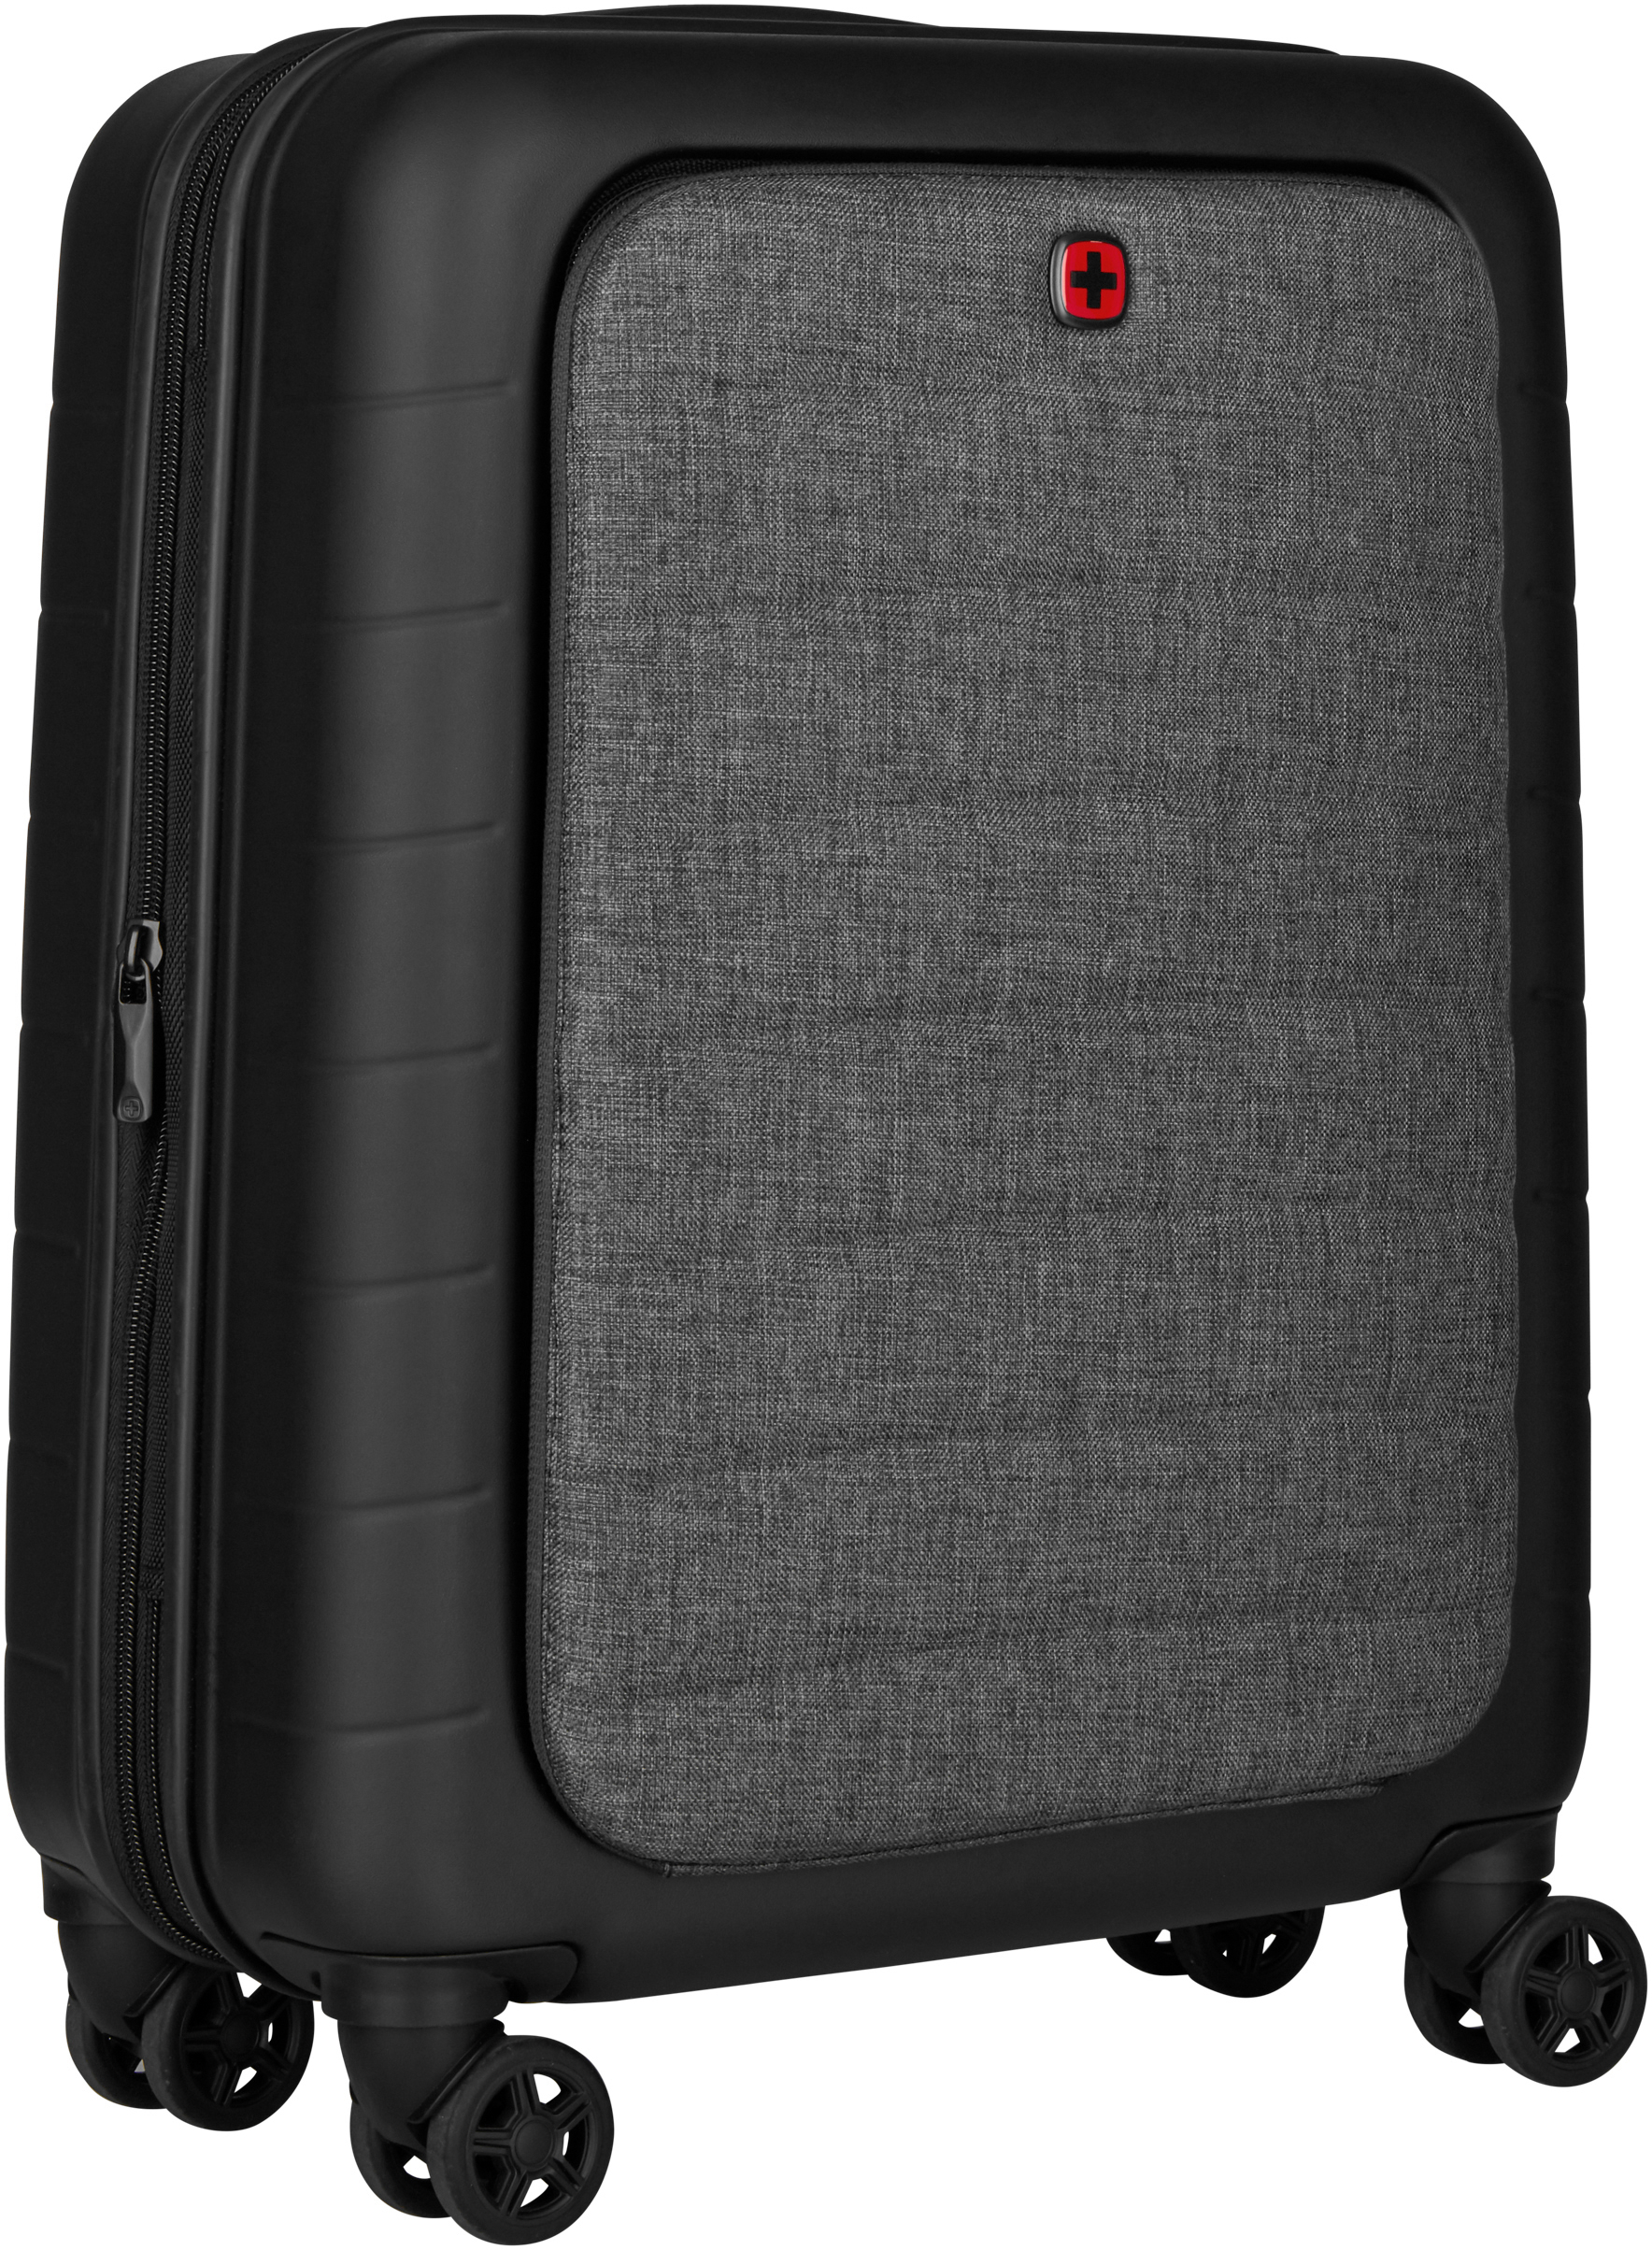 WENGER Syntry Carry-on 44L 610163 black/grey black/grey